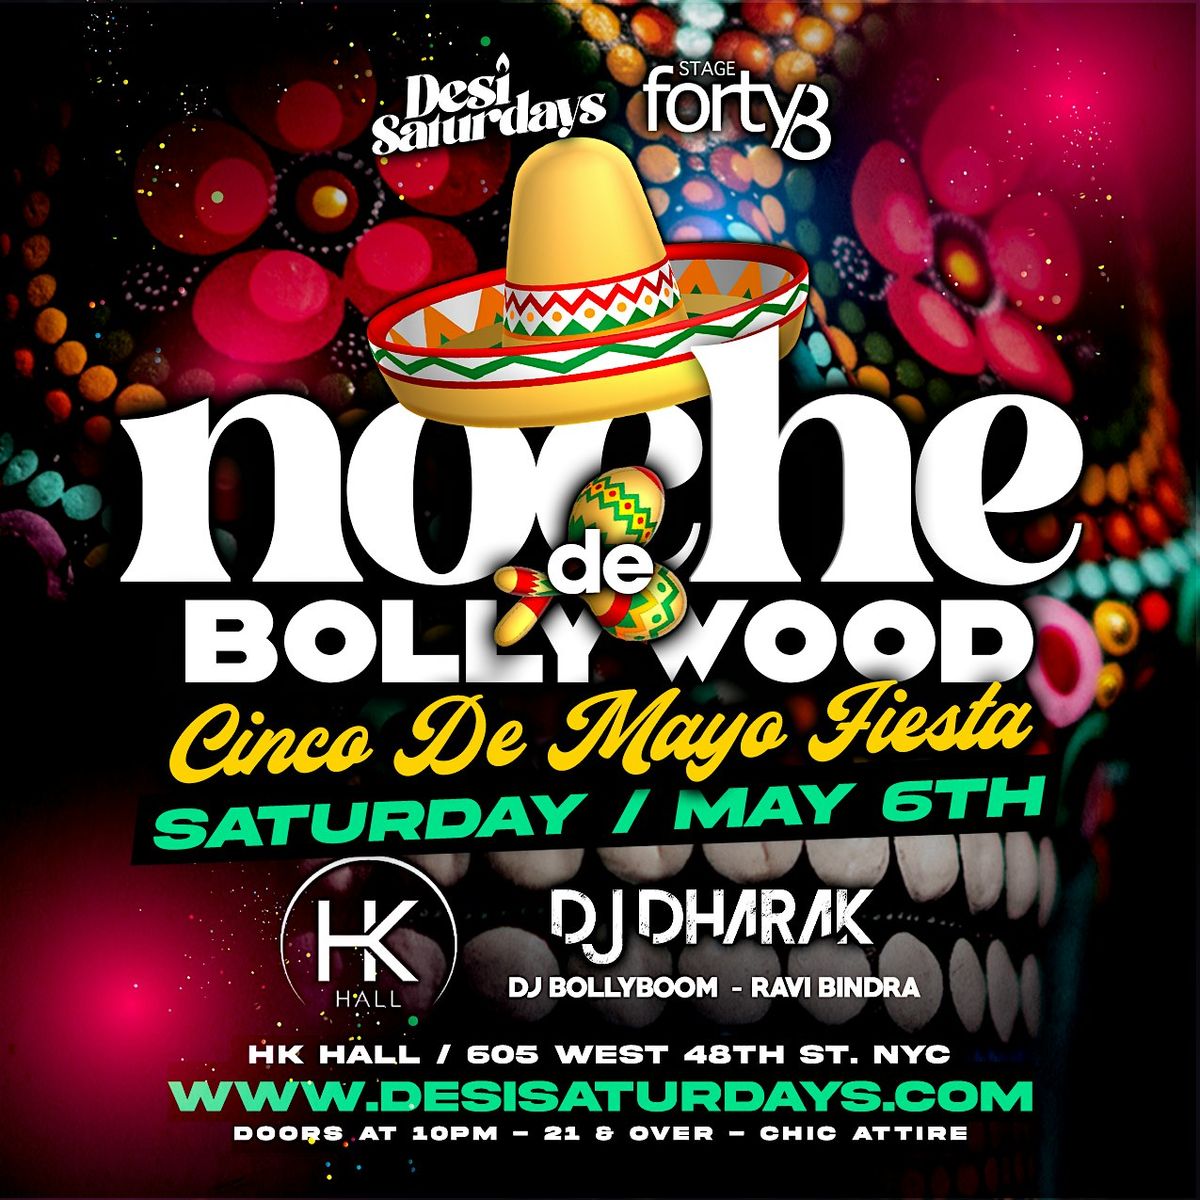 Cinco De Mayo : Bollywood Party @ HK HALL  (Complimentary Admission)